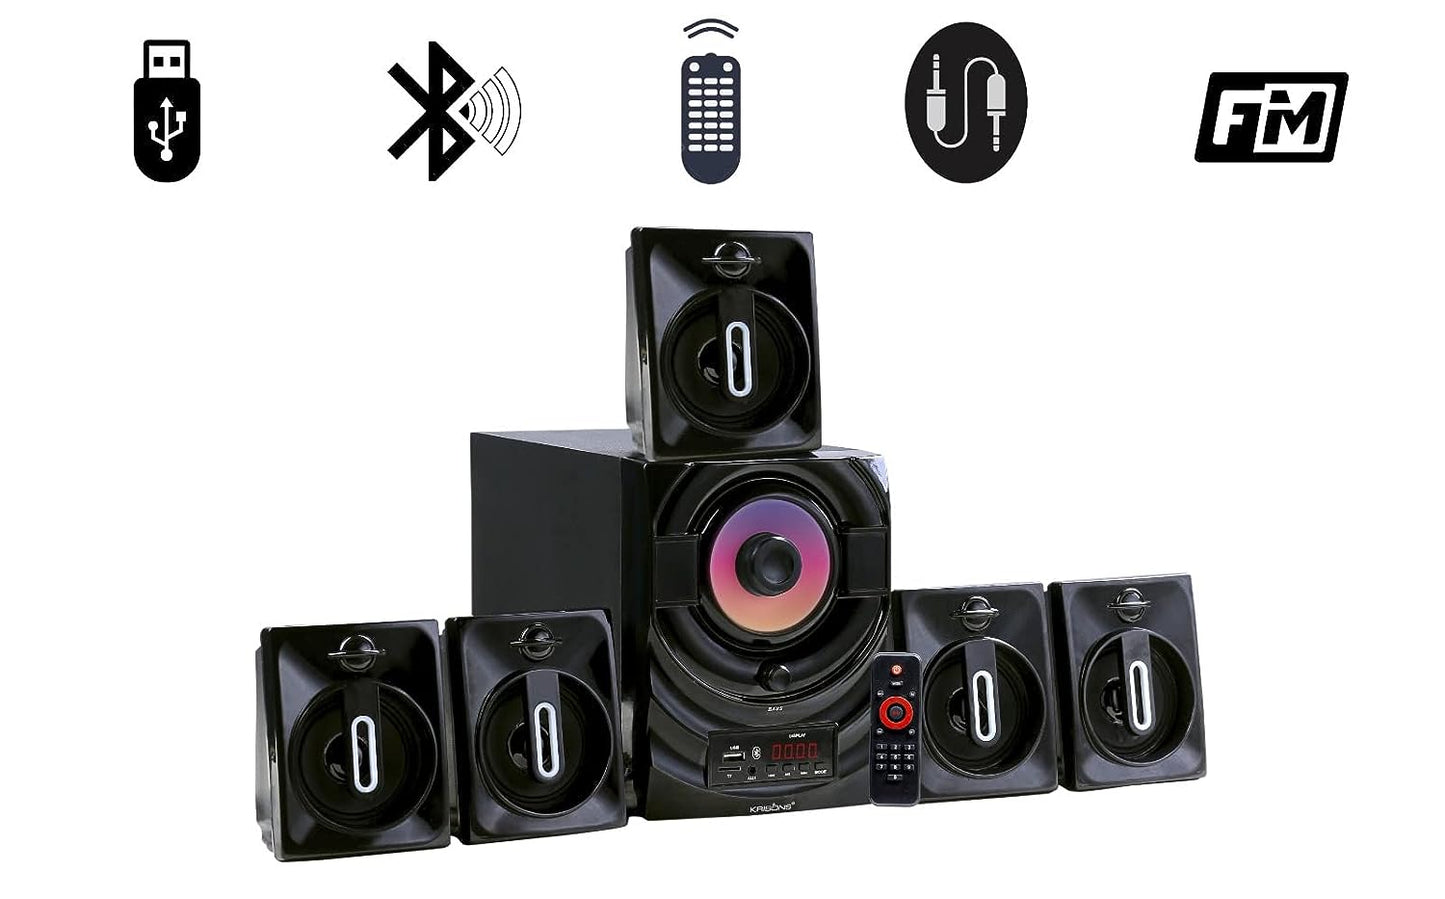 KRISONS Crown 5.1 Home Theater | Bluetooth Supporting Home Theatre 5.1 | USB, AUX, LCD Display, Built-in FM, Recording, Remote Control. 60W Home Theatre